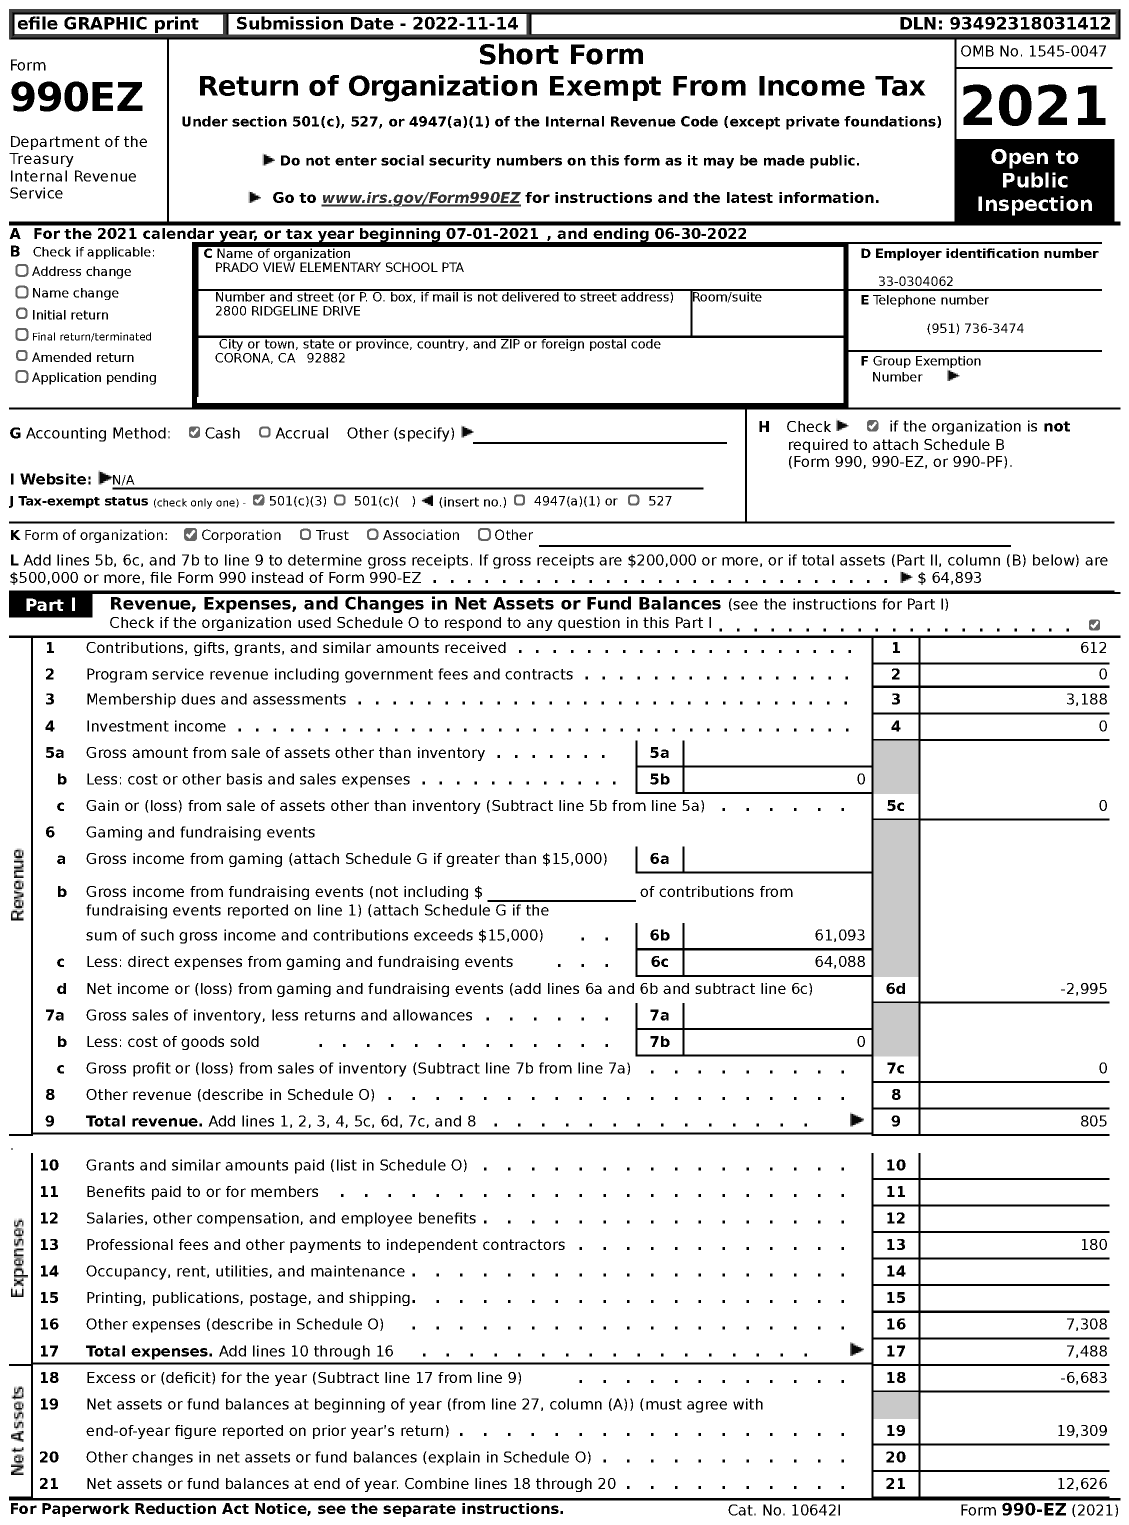 Image of first page of 2021 Form 990EZ for California State PTA - Prado View Elementary PTA